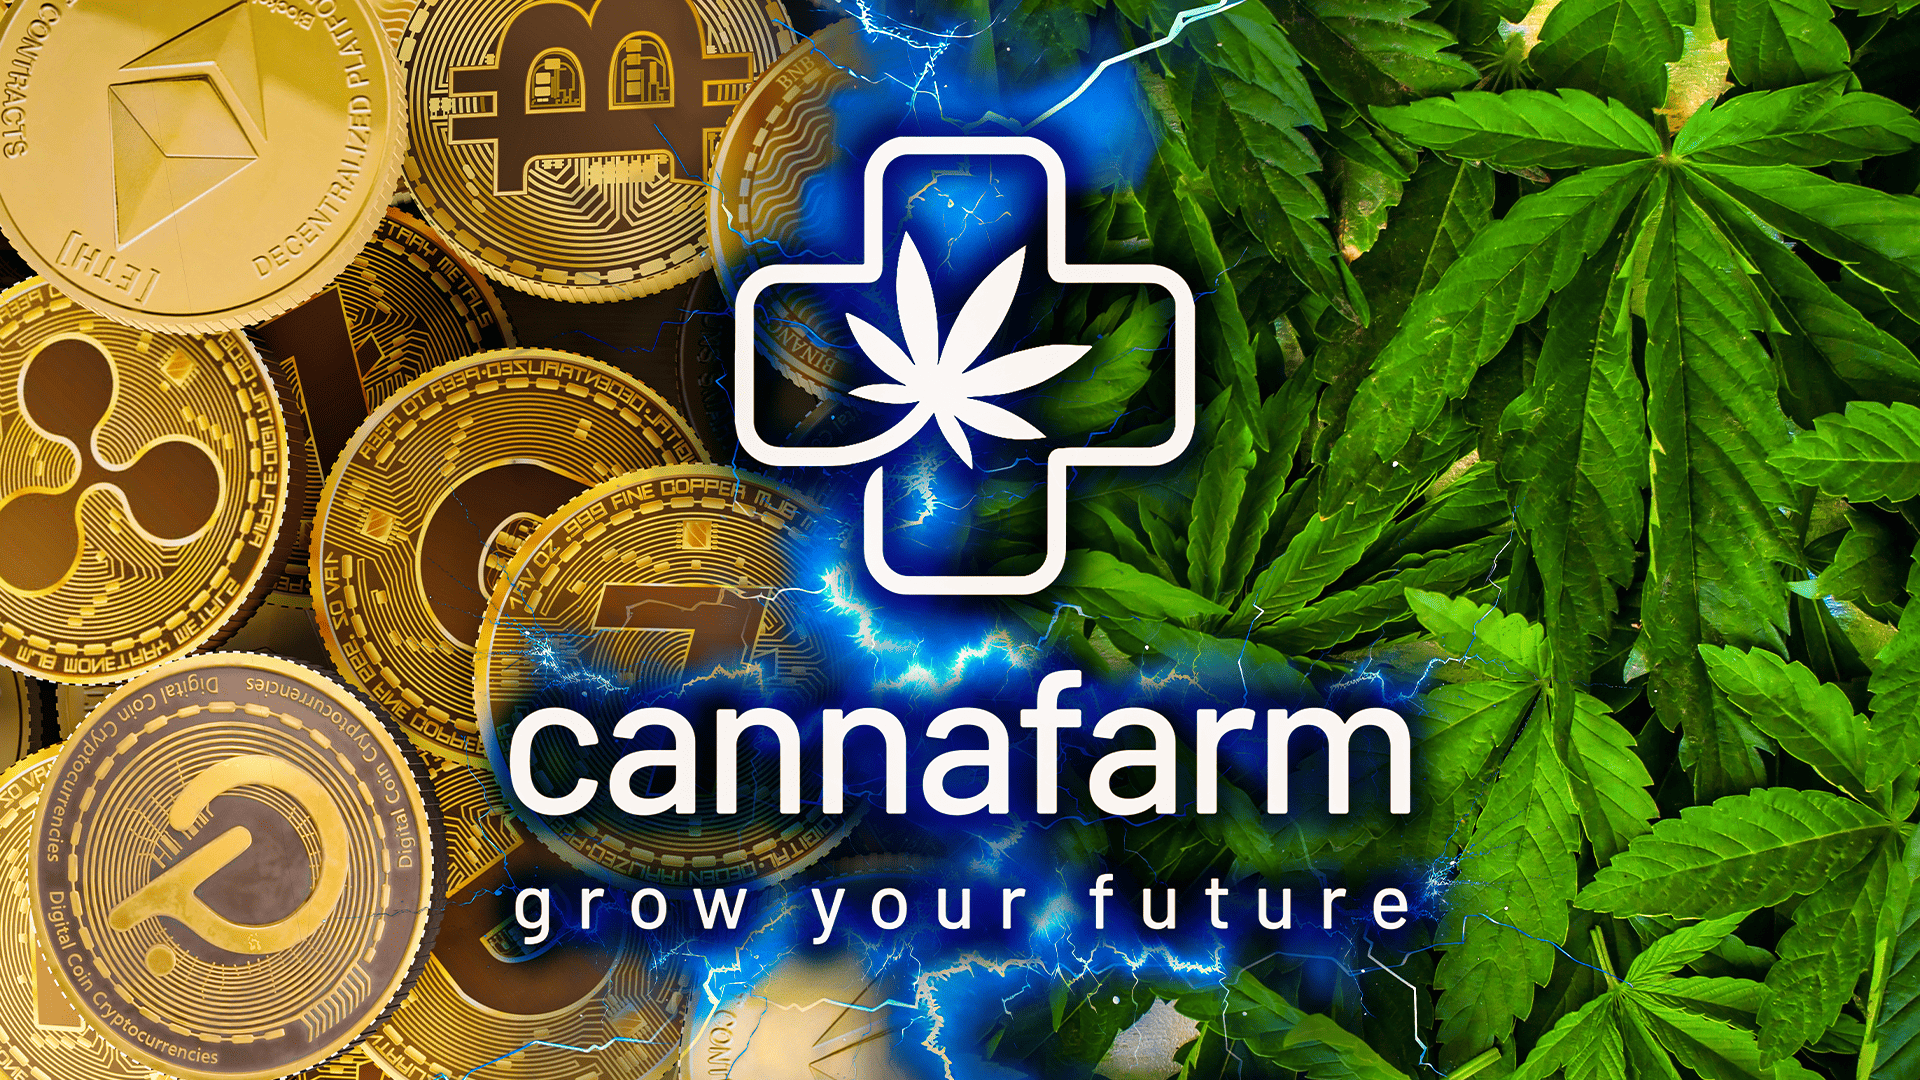 Combining-the-incongruous:-from-cryptocurrencies-to-organics-with-cannafarm